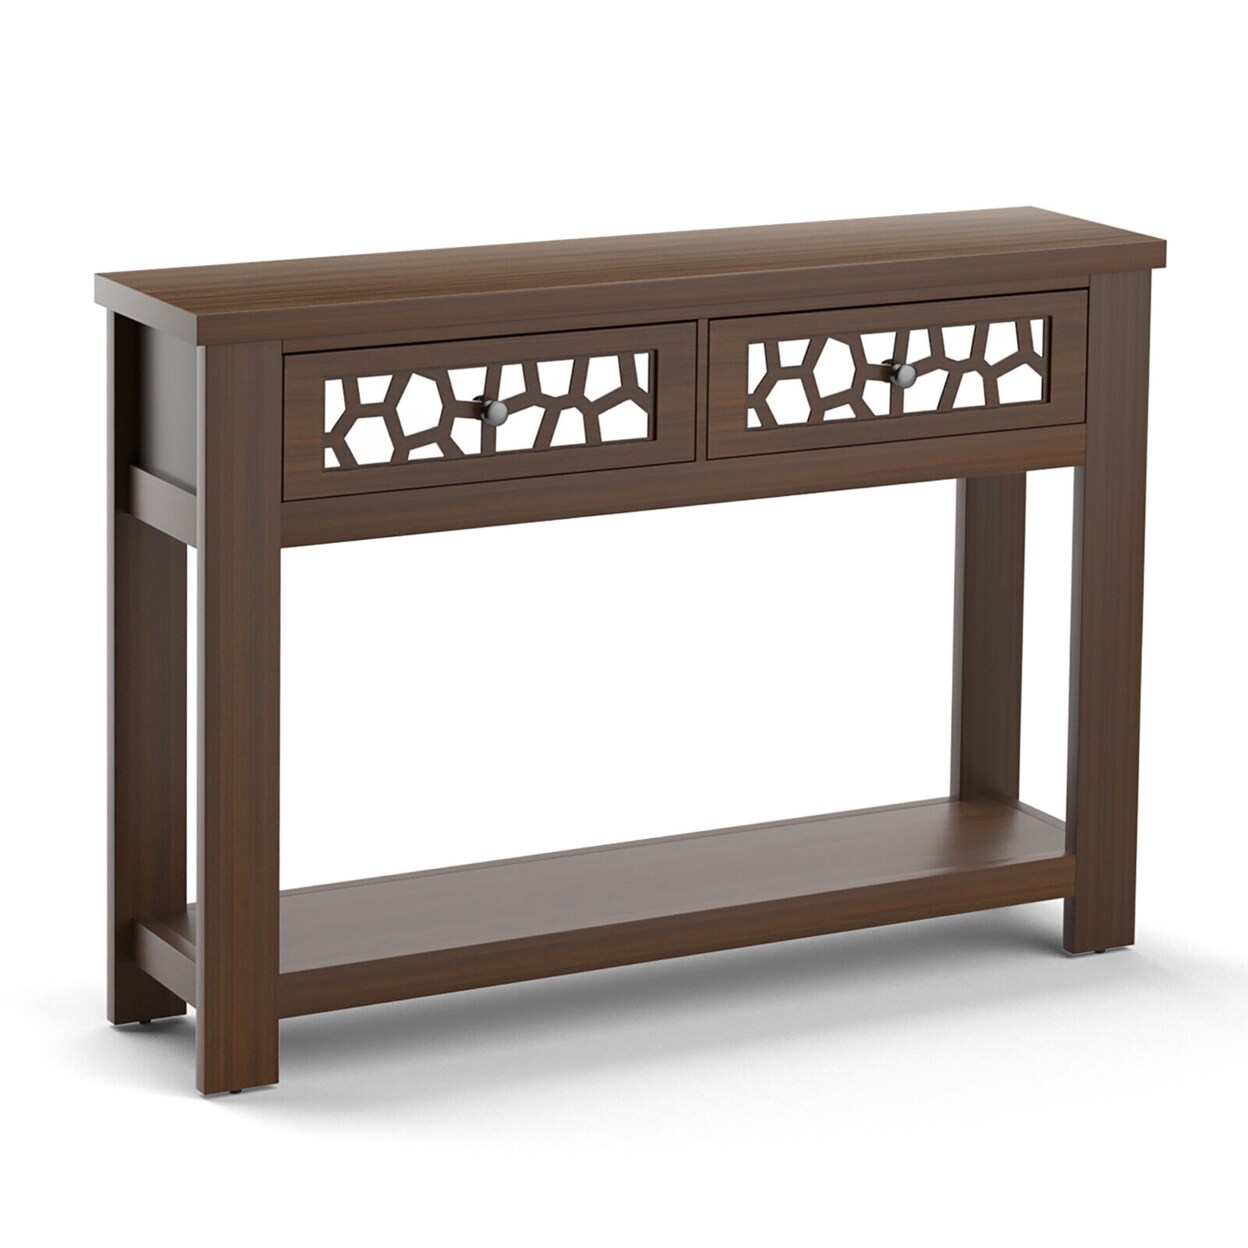 Gymax 2-tier Console Entryway Table w/ Drawers for Living Room Entrance Rustic